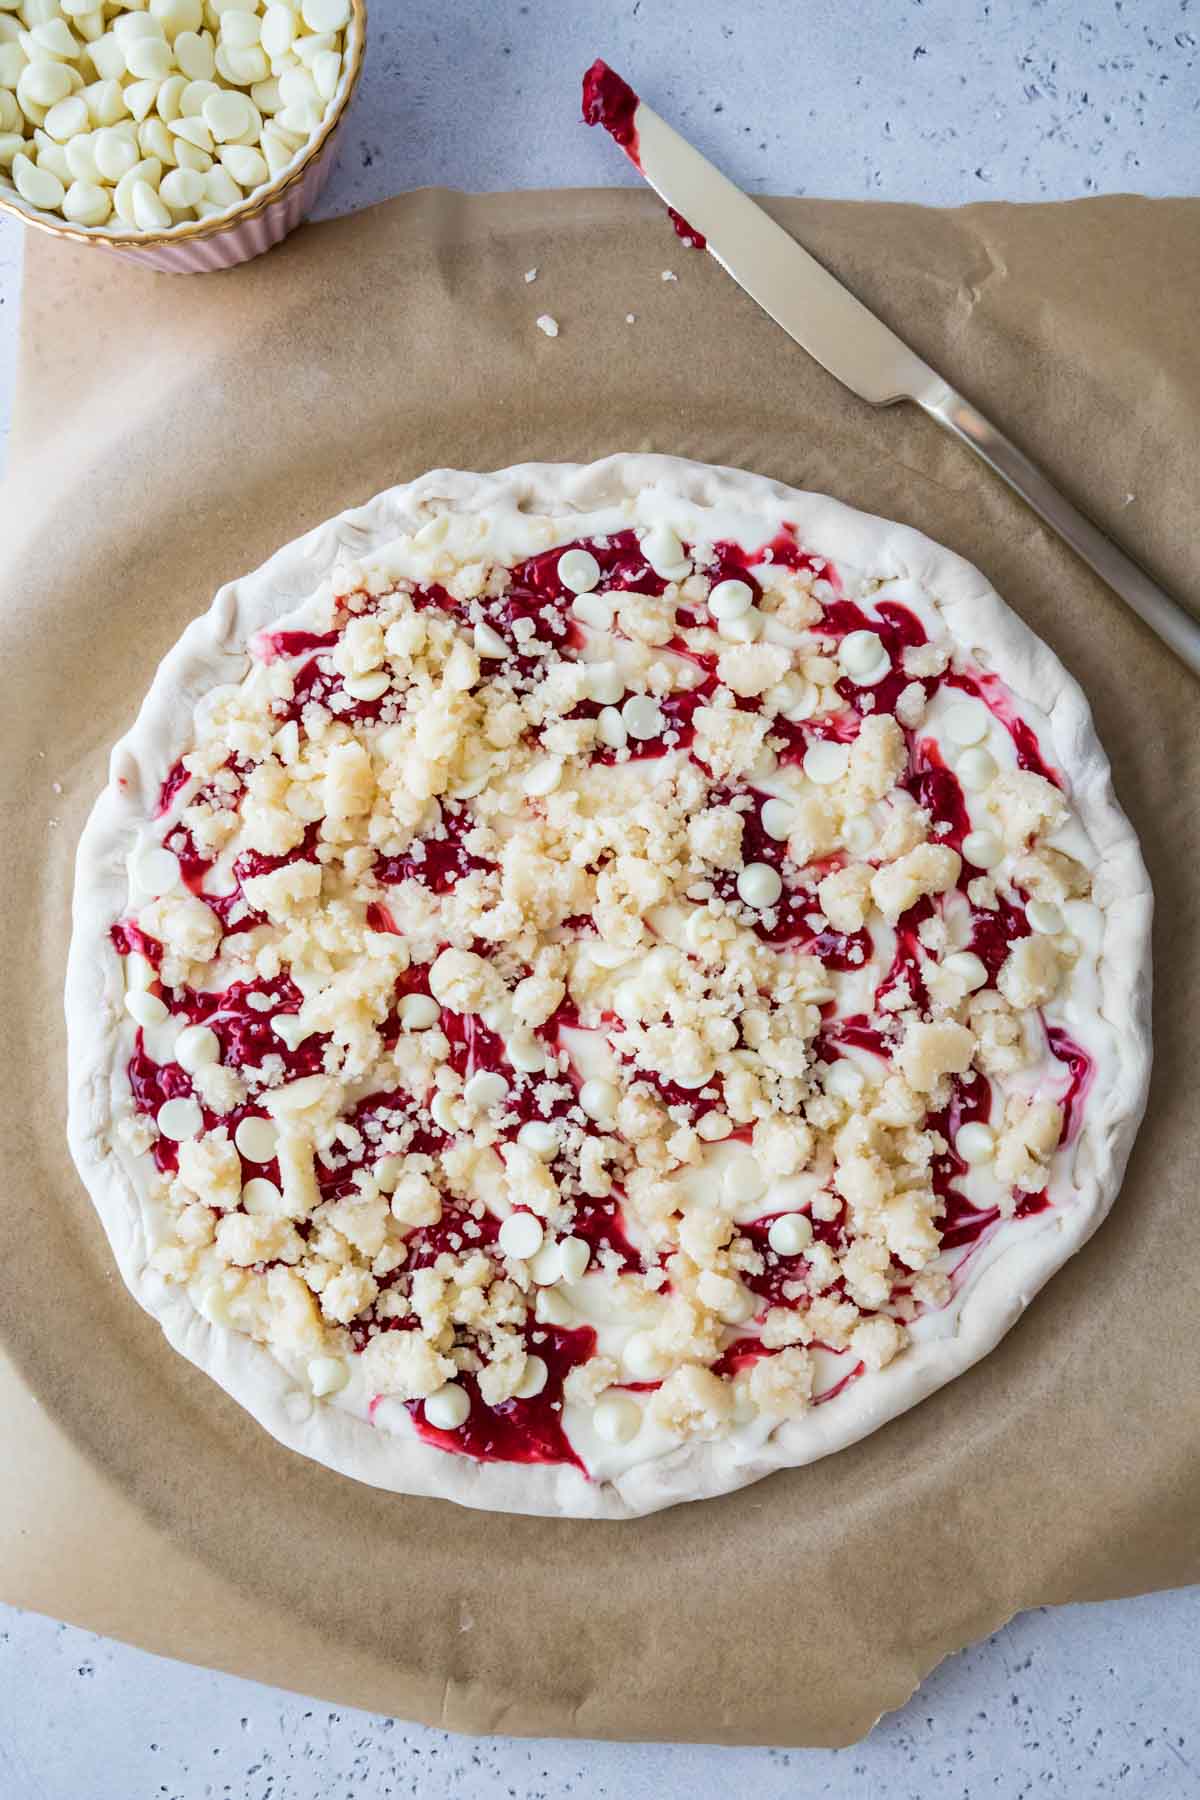 Overhead view of pizza dough topped with cream cheese sauce, raspberry jam, white chocolate chips, and streusel.